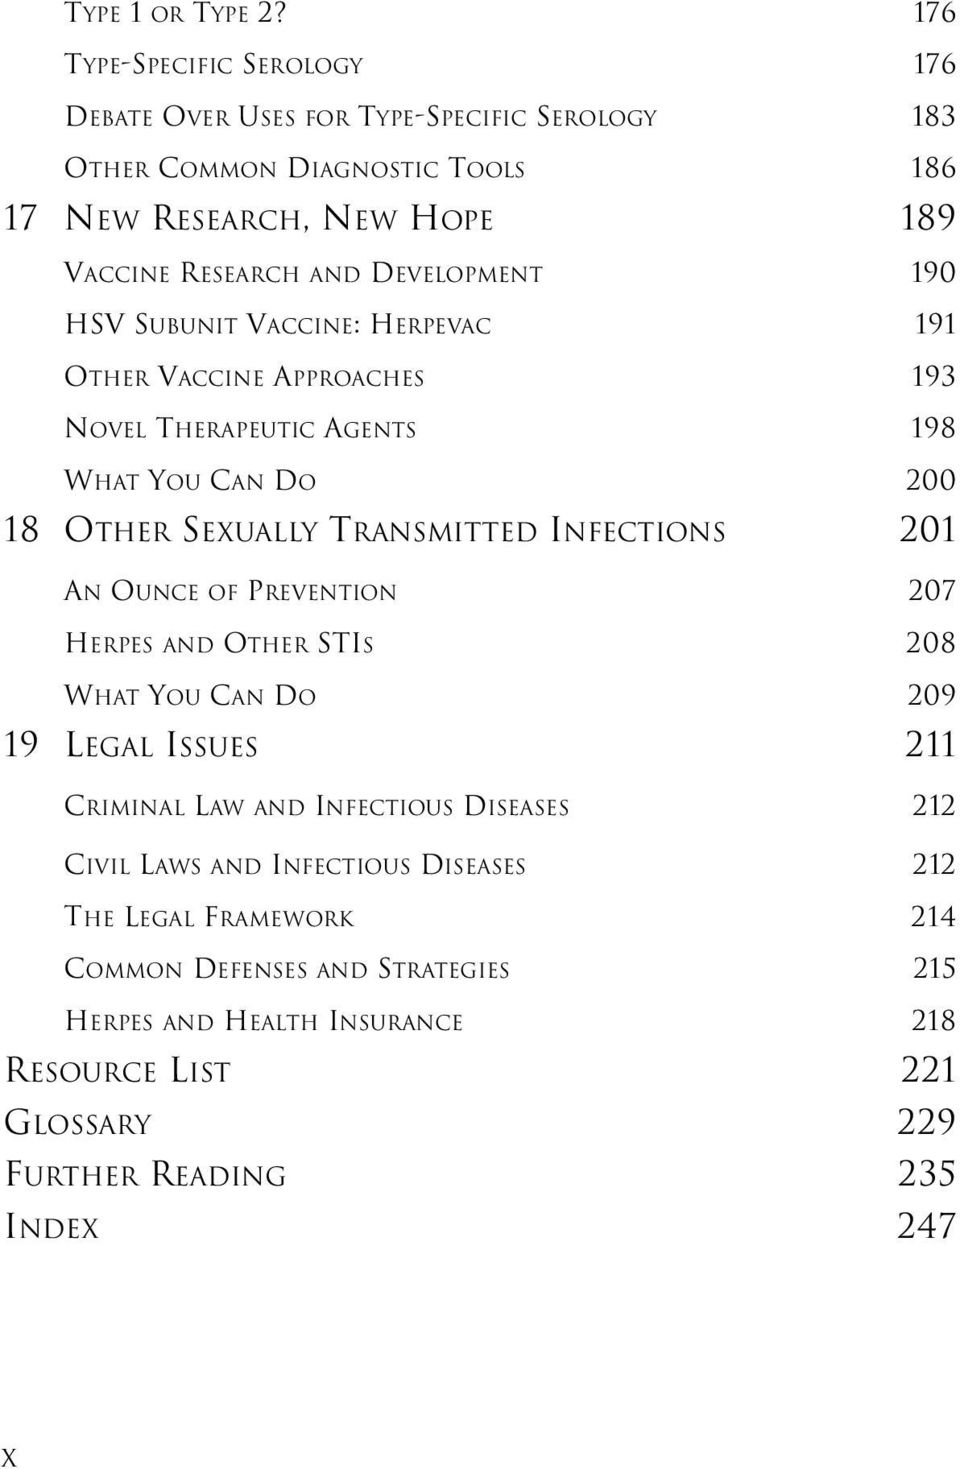 Development 190 HSV Subunit Vaccine: Herpevac 191 Other Vaccine Approaches 193 Novel Therapeutic Agents 198 What You Can Do 200 18 Other Sexually Transmitted Infections